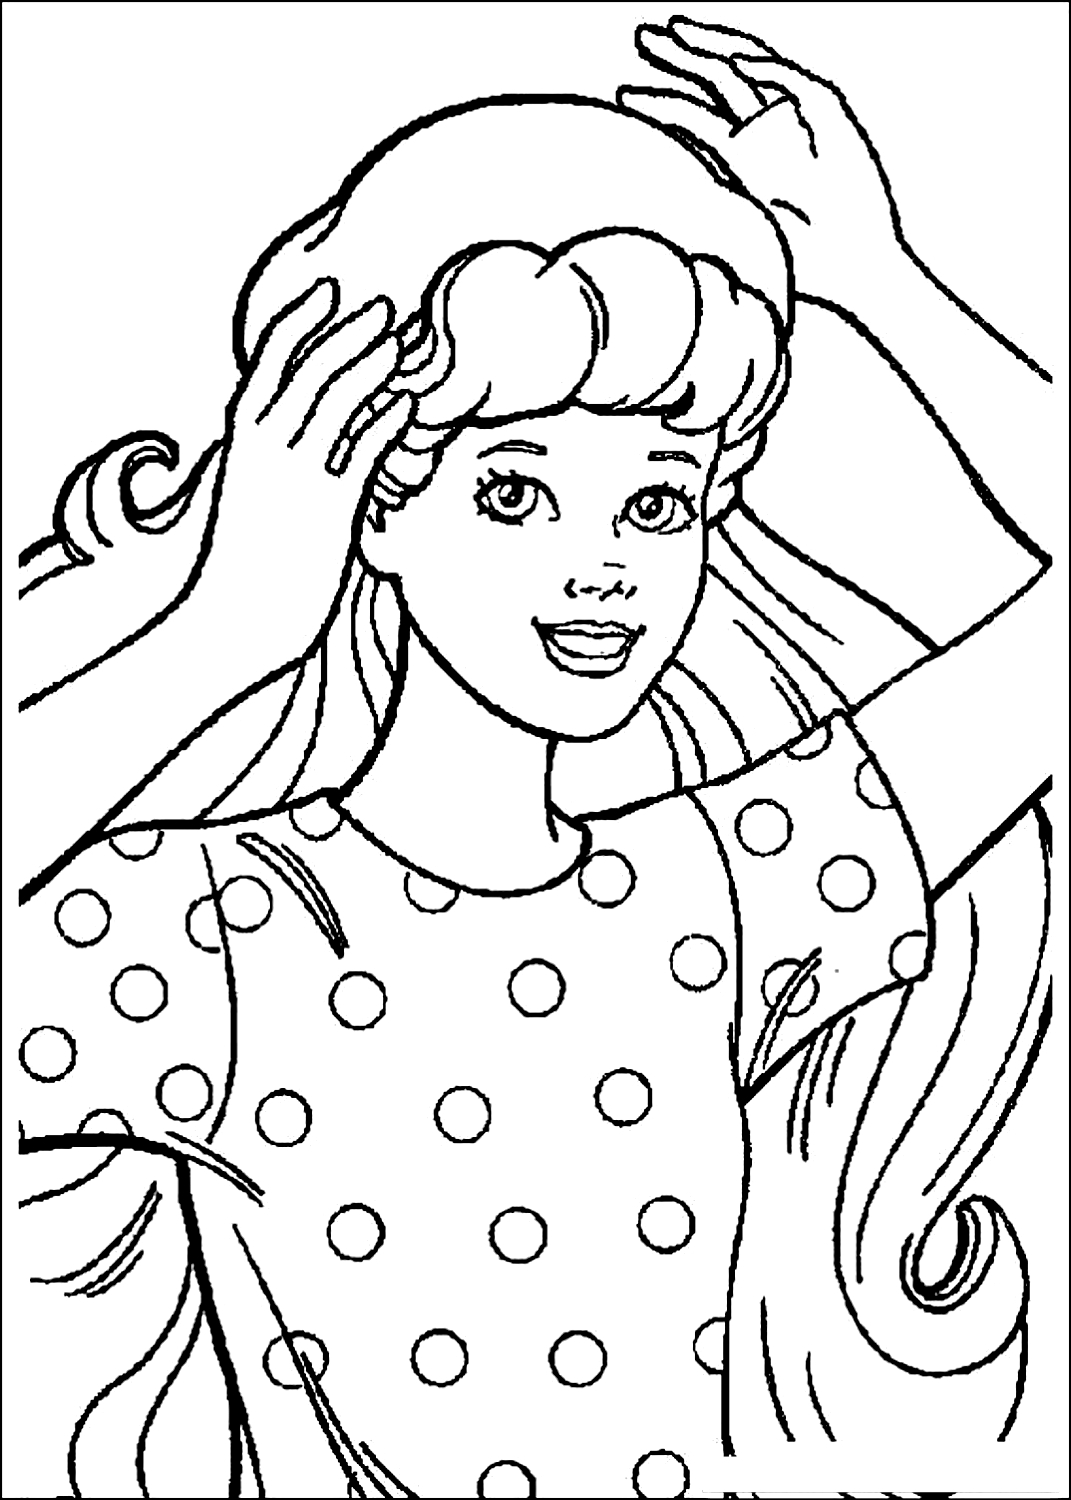 Drawing 27 from Barbie to print and coloring